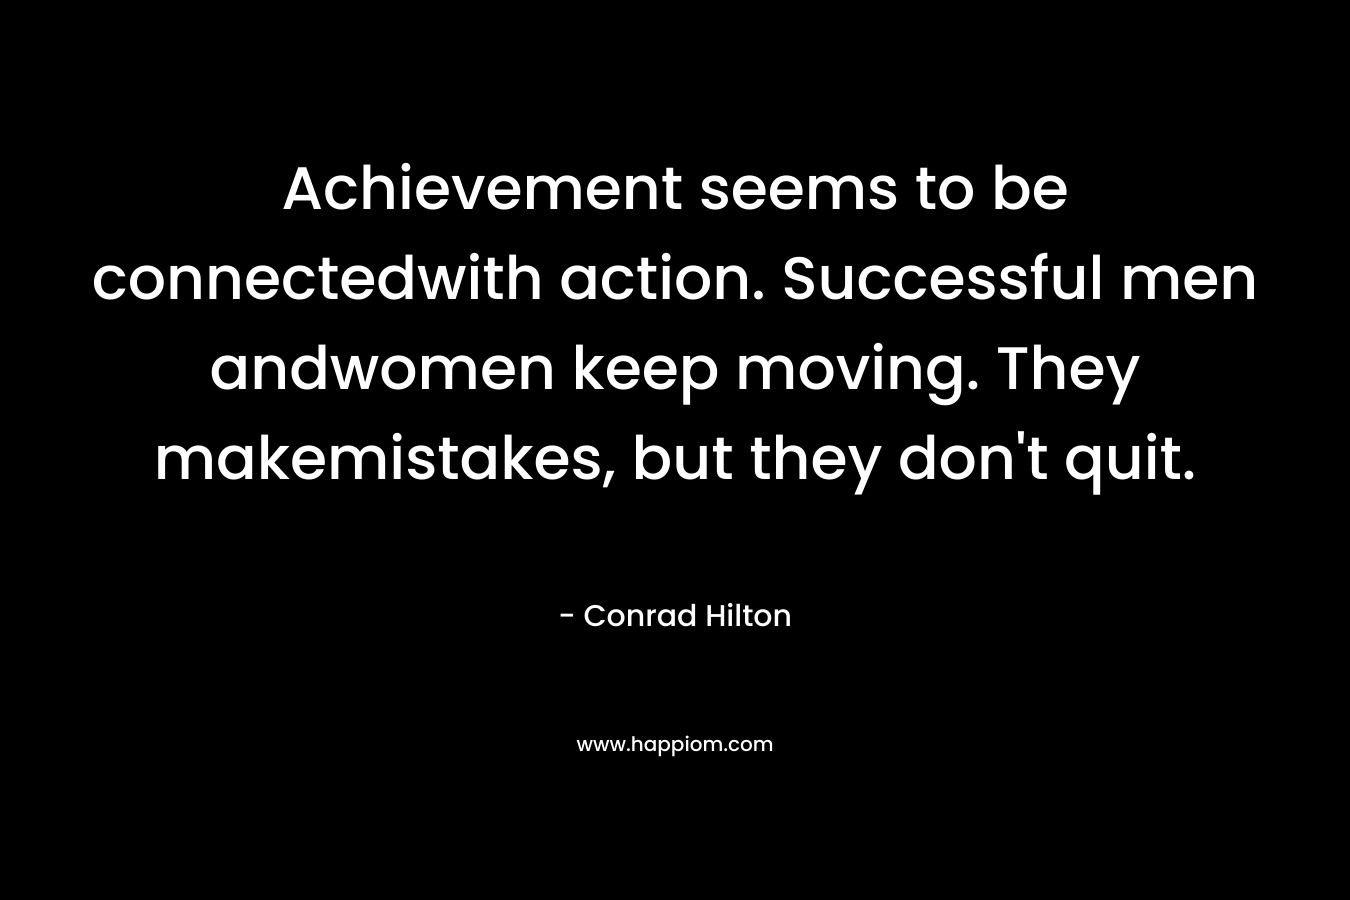 Achievement seems to be connectedwith action. Successful men andwomen keep moving. They makemistakes, but they don't quit.